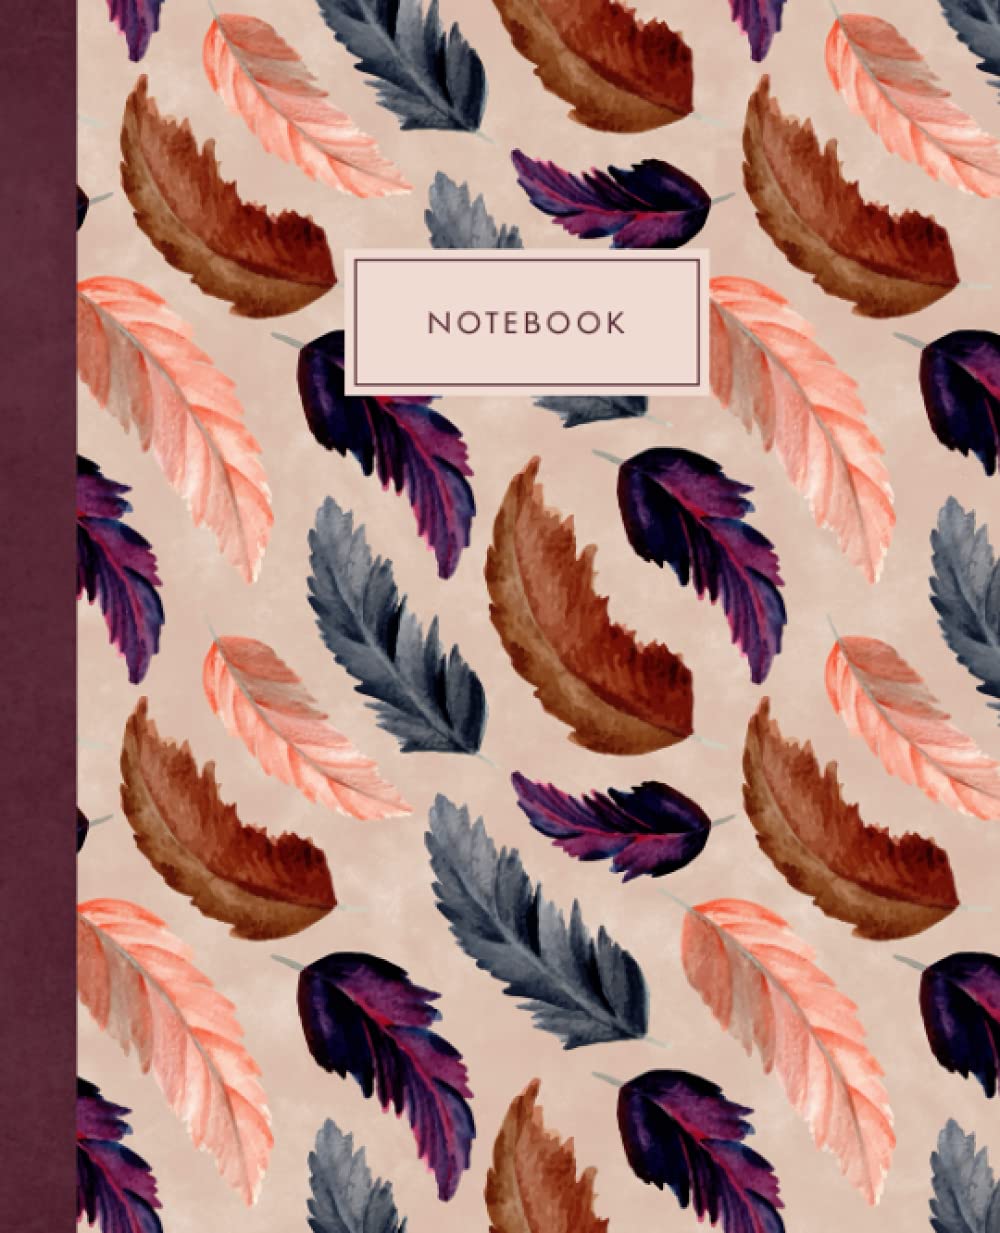 Notebook: College Ruled Composition Notebook – Blank Lined Journal – Aesthetic Boho Feathers Pattern